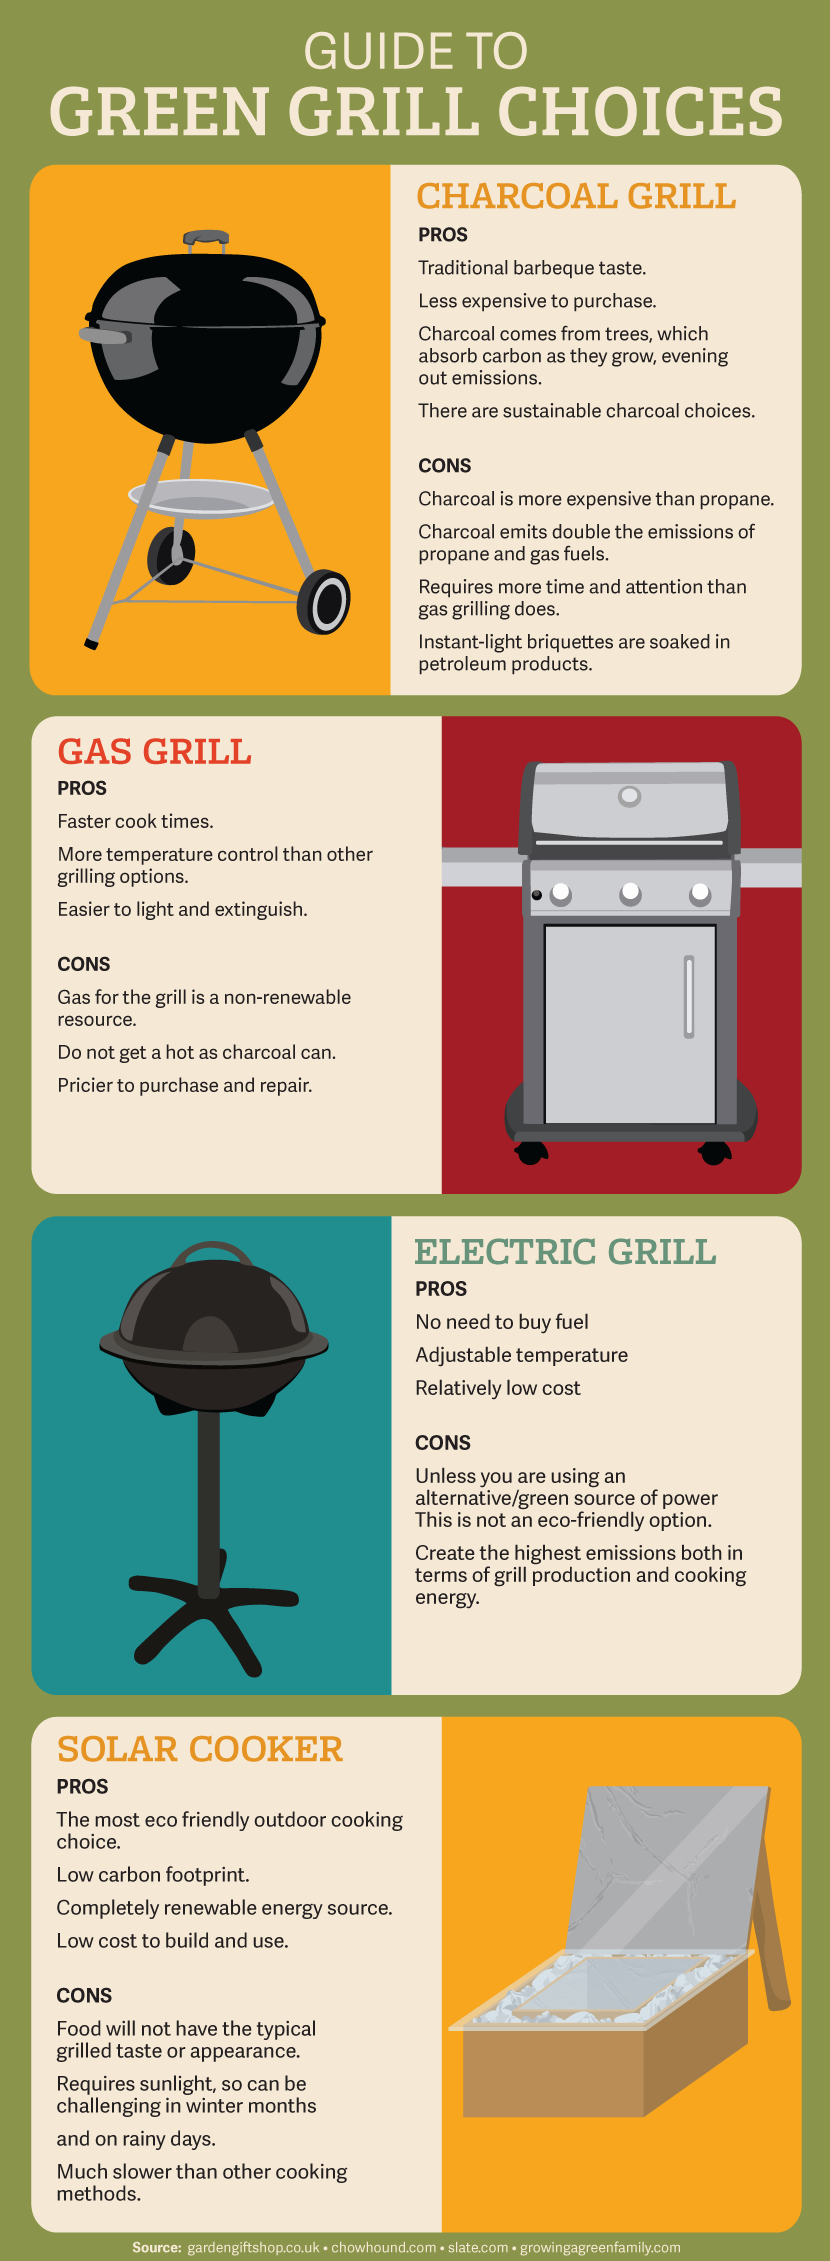 Electric Grill - Grill Buying Guides